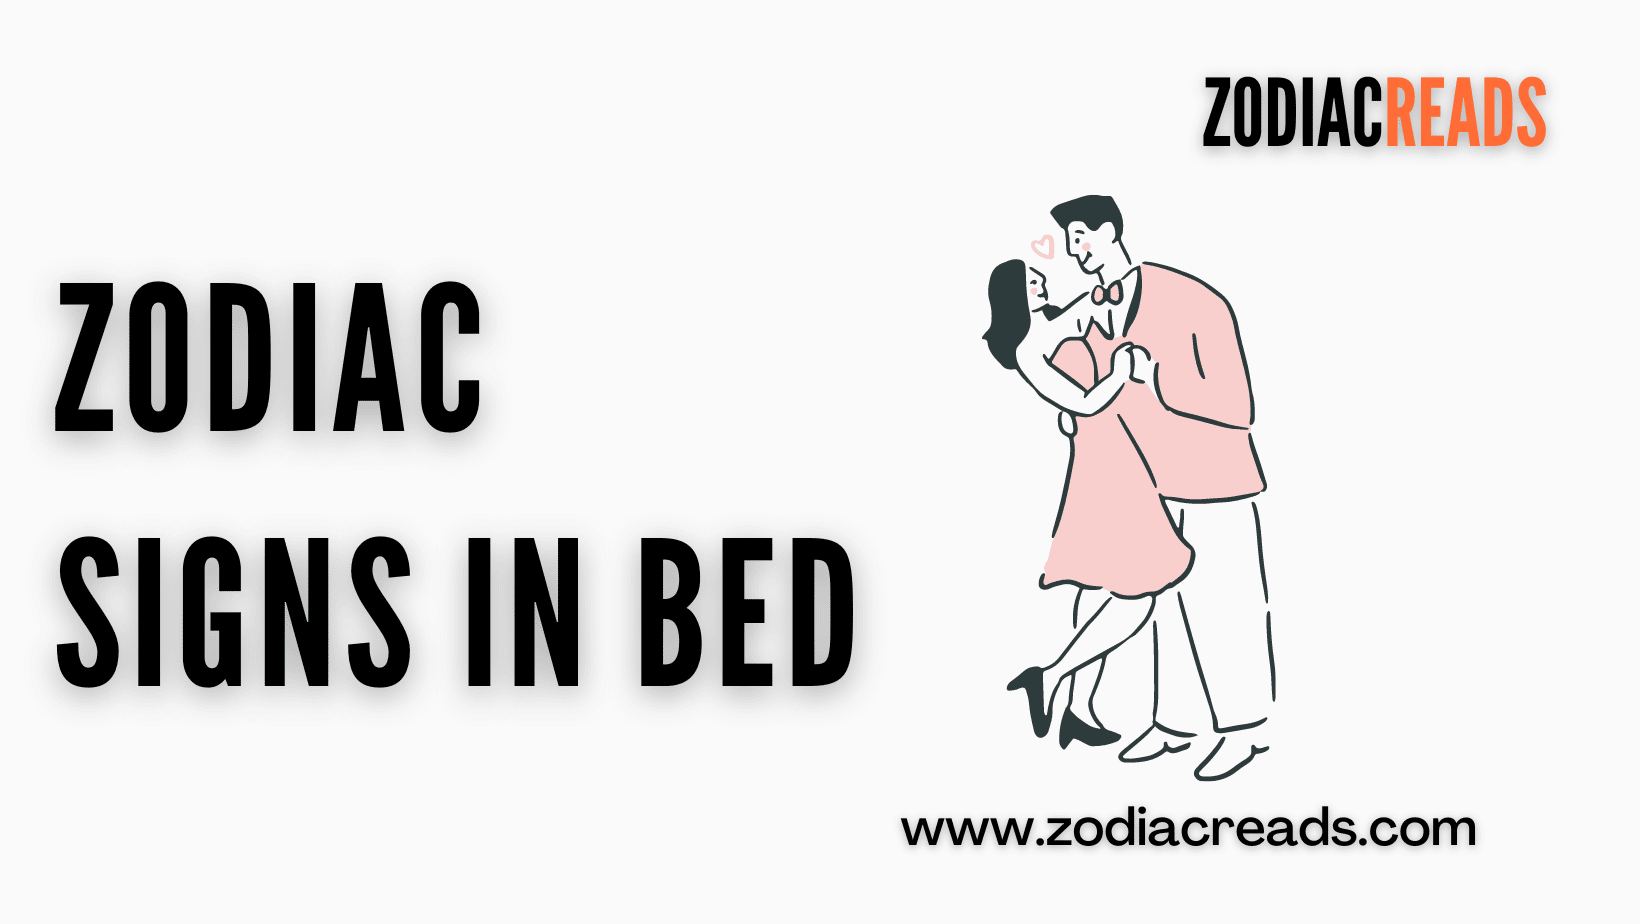 Zodiac signs in bed